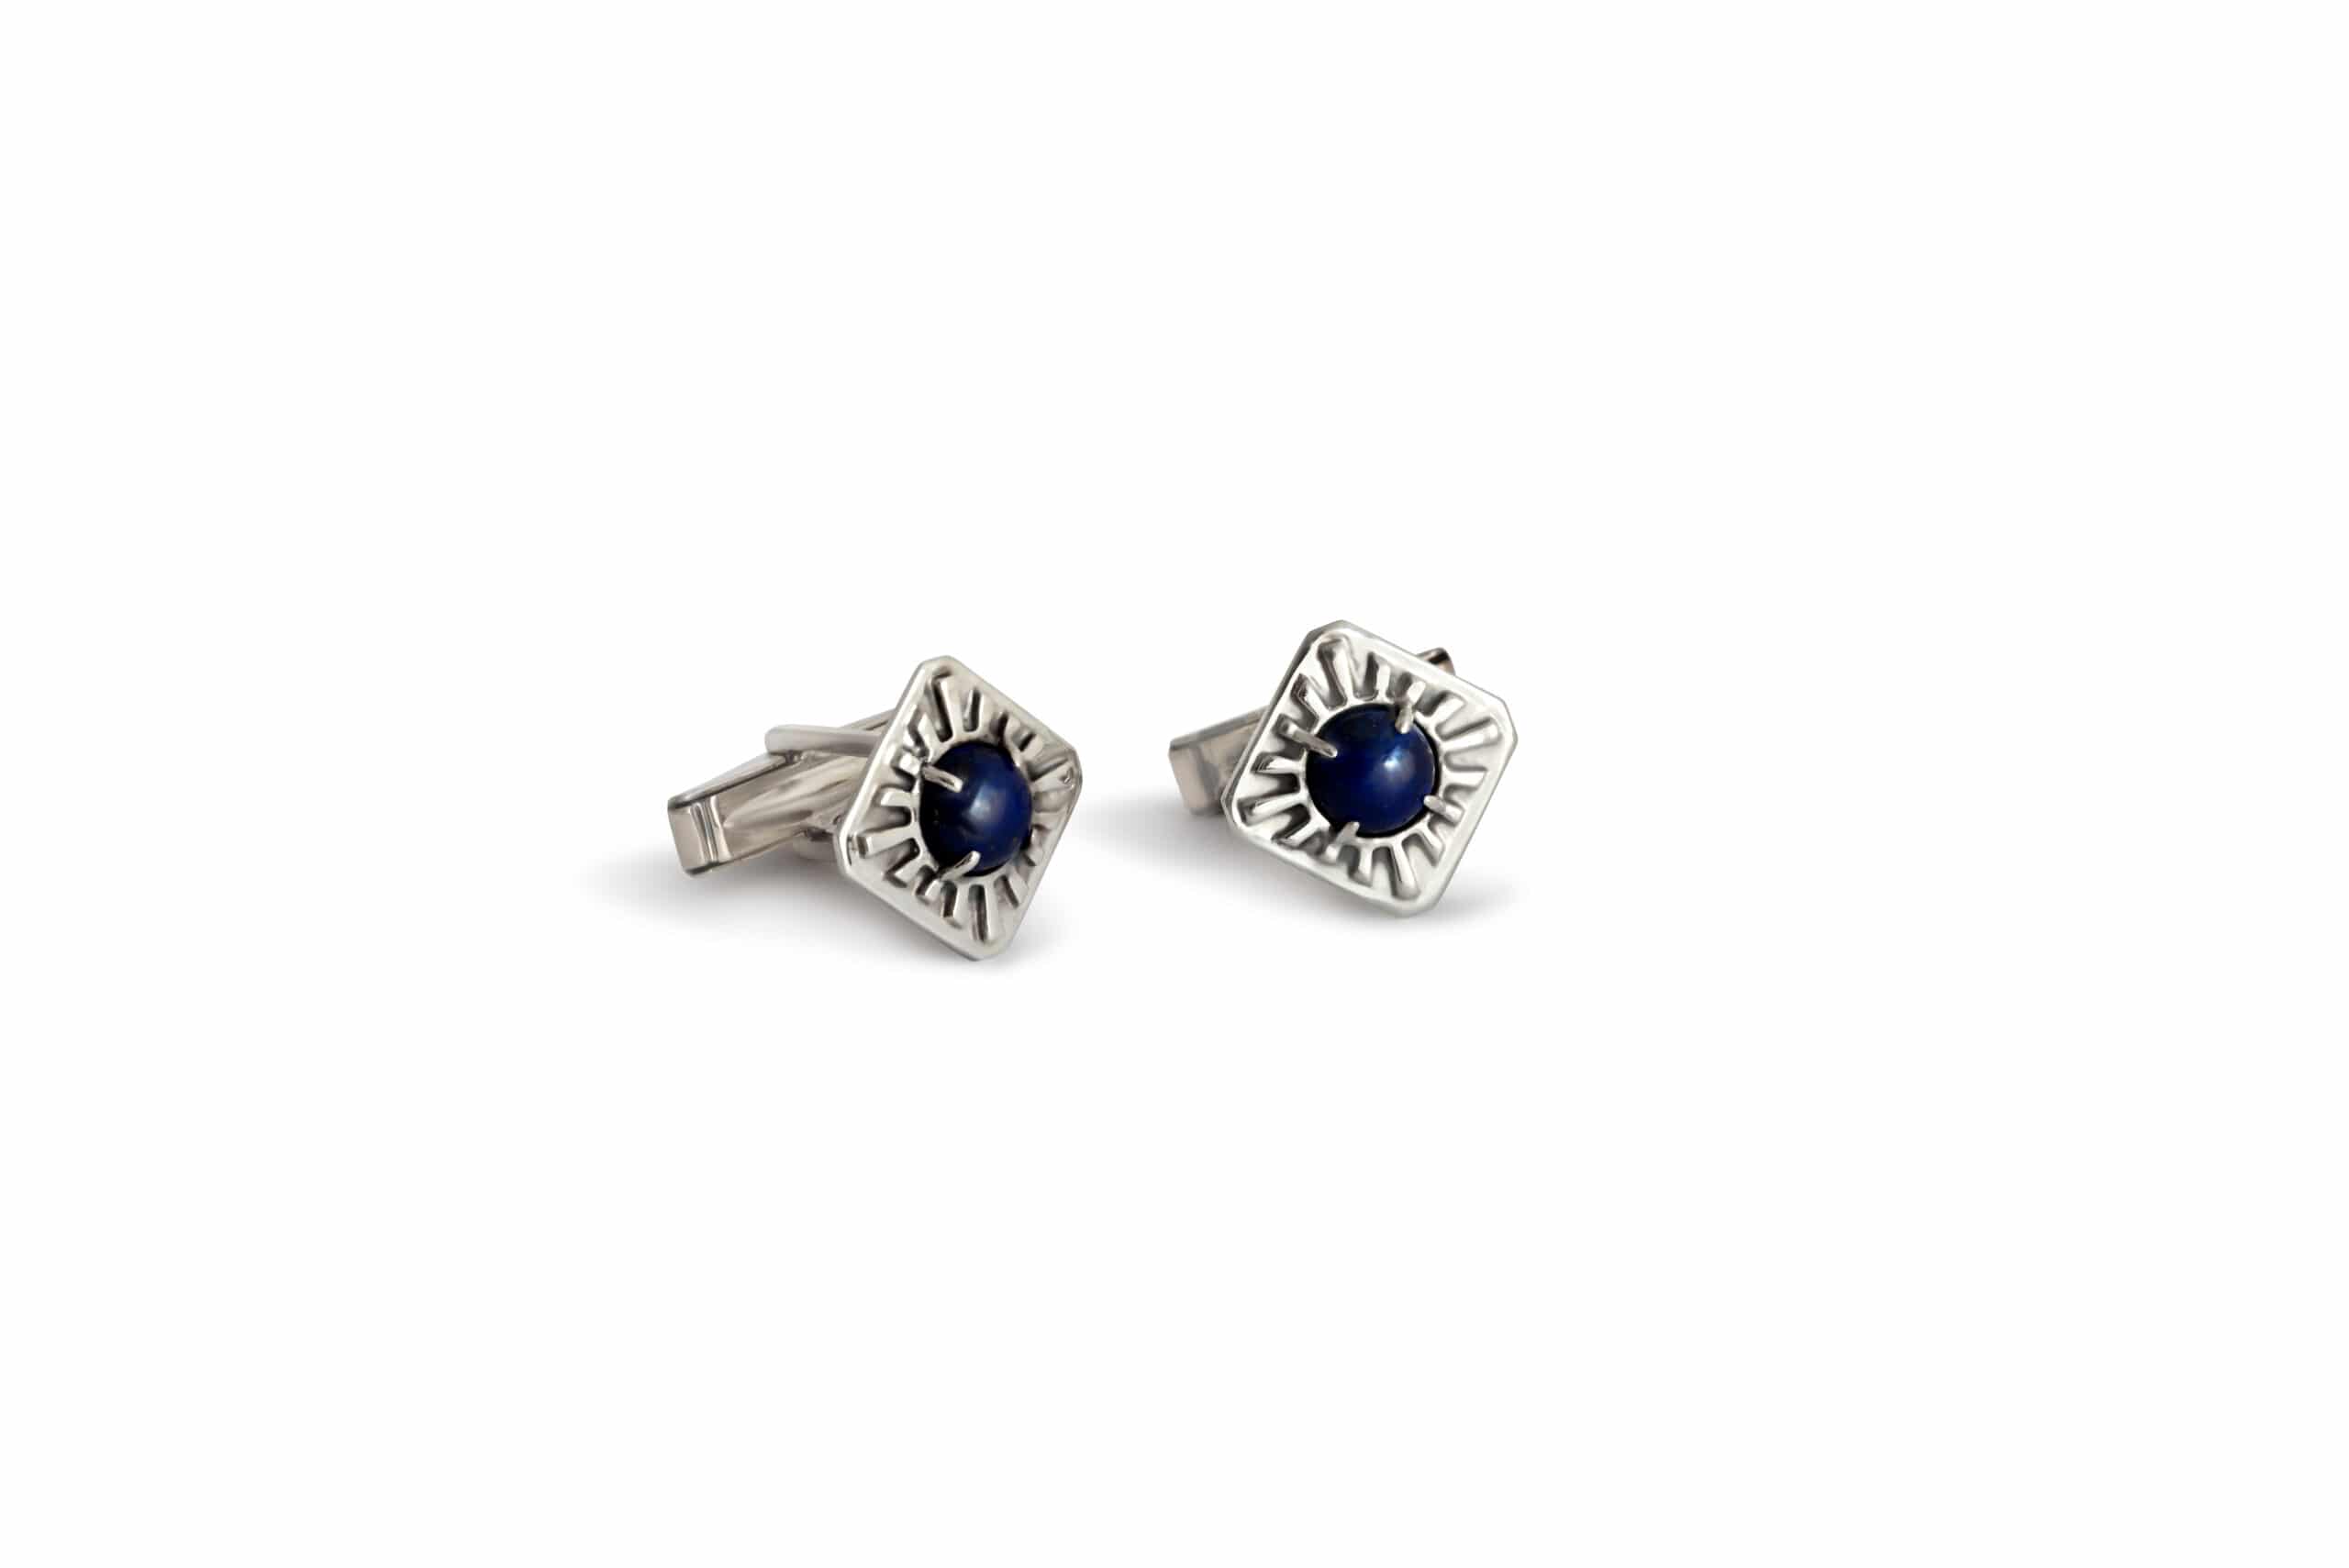 Square Silver Cufflinks with Blue Lapis Stones